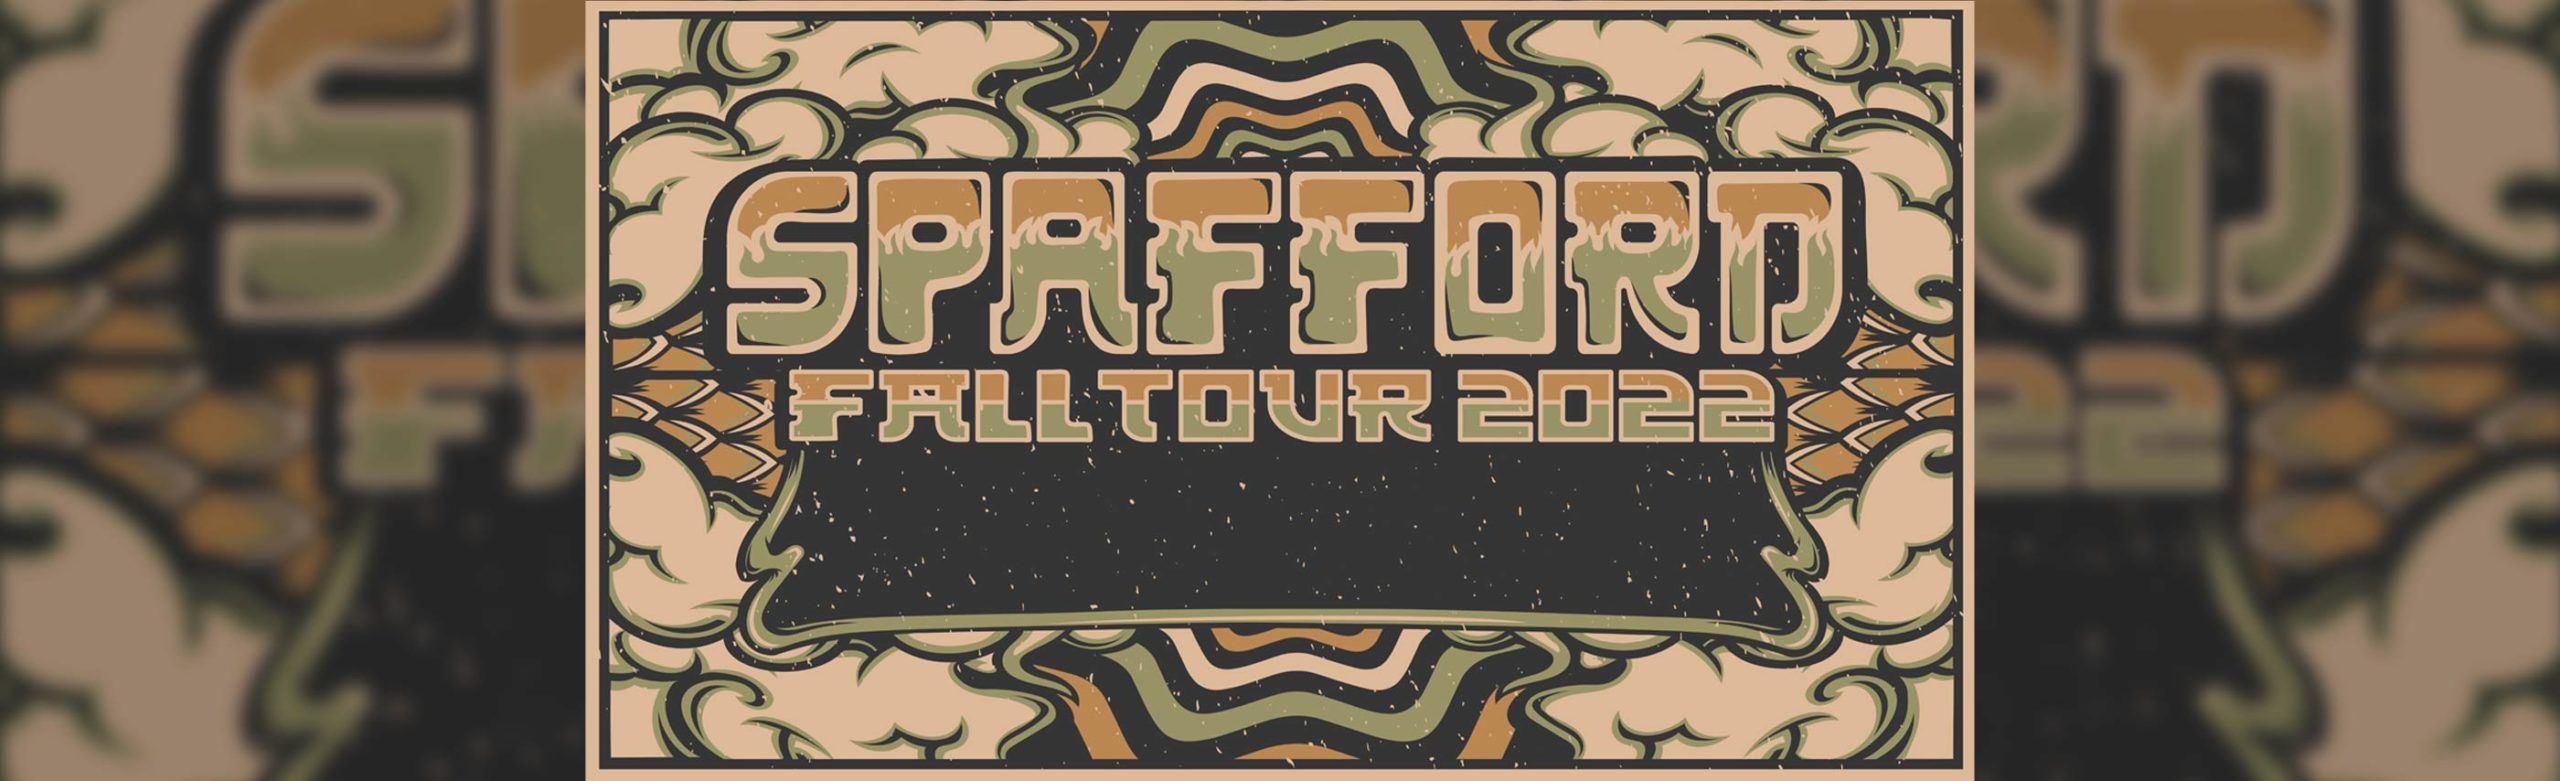 Win Tickets to Spafford in Montana at The ELM or The Top Hat Image